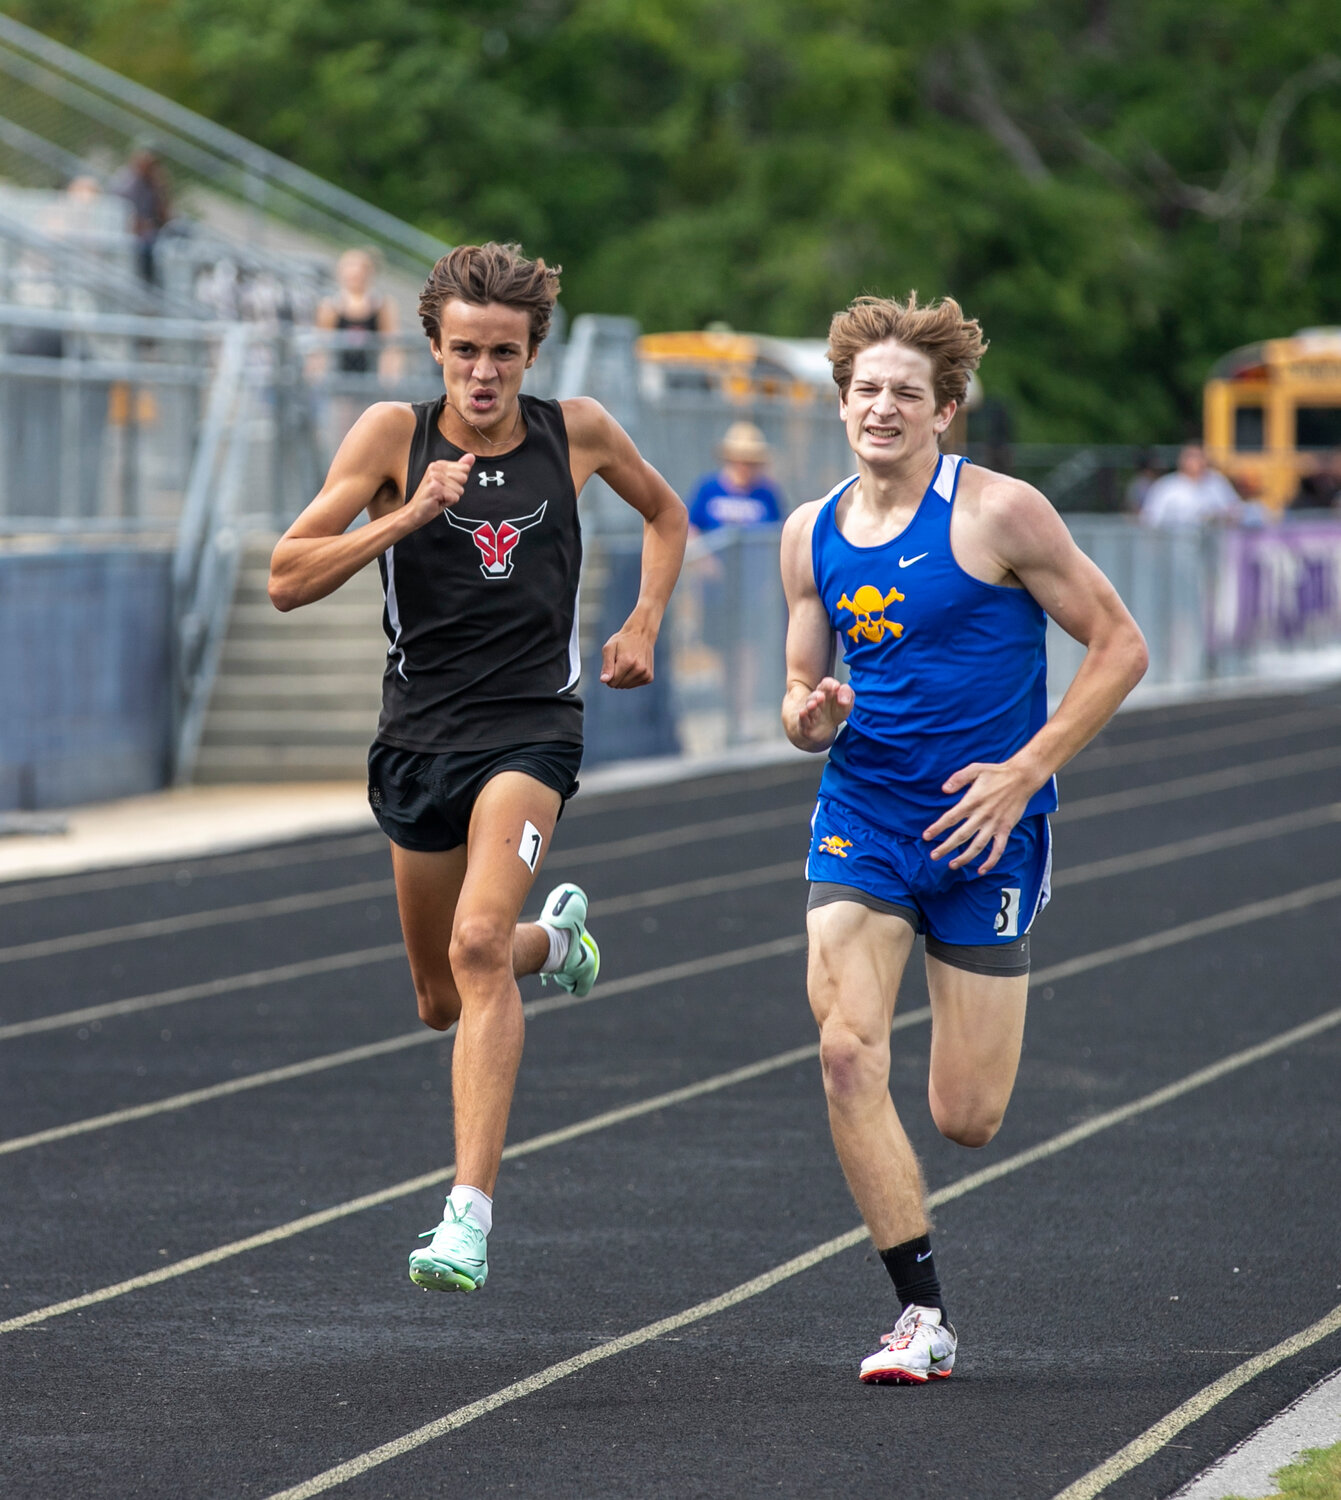 Spanish Fort junior Winston McGhee looks to overtake Fairhope sophomore Will Garner in the homestretch of the 800-meter run at the Baldwin County track and field championships Tuesday afternoon at Jubilee Stadium. McGhee’s time of 1:58.73 edged Garner’s time of 1:58.87 for first place.